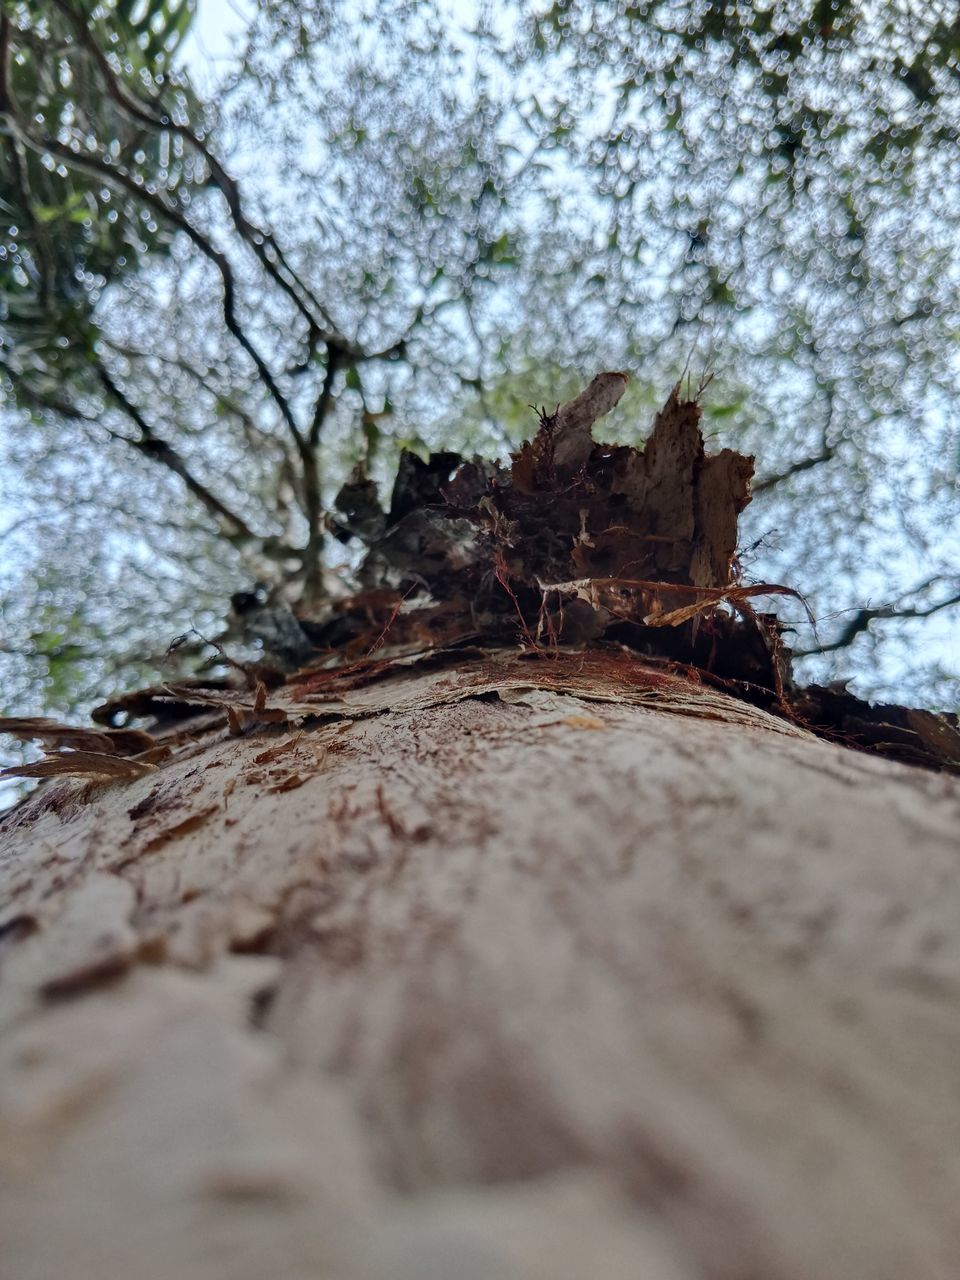 tree, plant, nature, no people, wood, leaf, winter, day, branch, selective focus, tree trunk, low angle view, land, outdoors, trunk, sky, soil, growth, forest, tranquility, beauty in nature, close-up